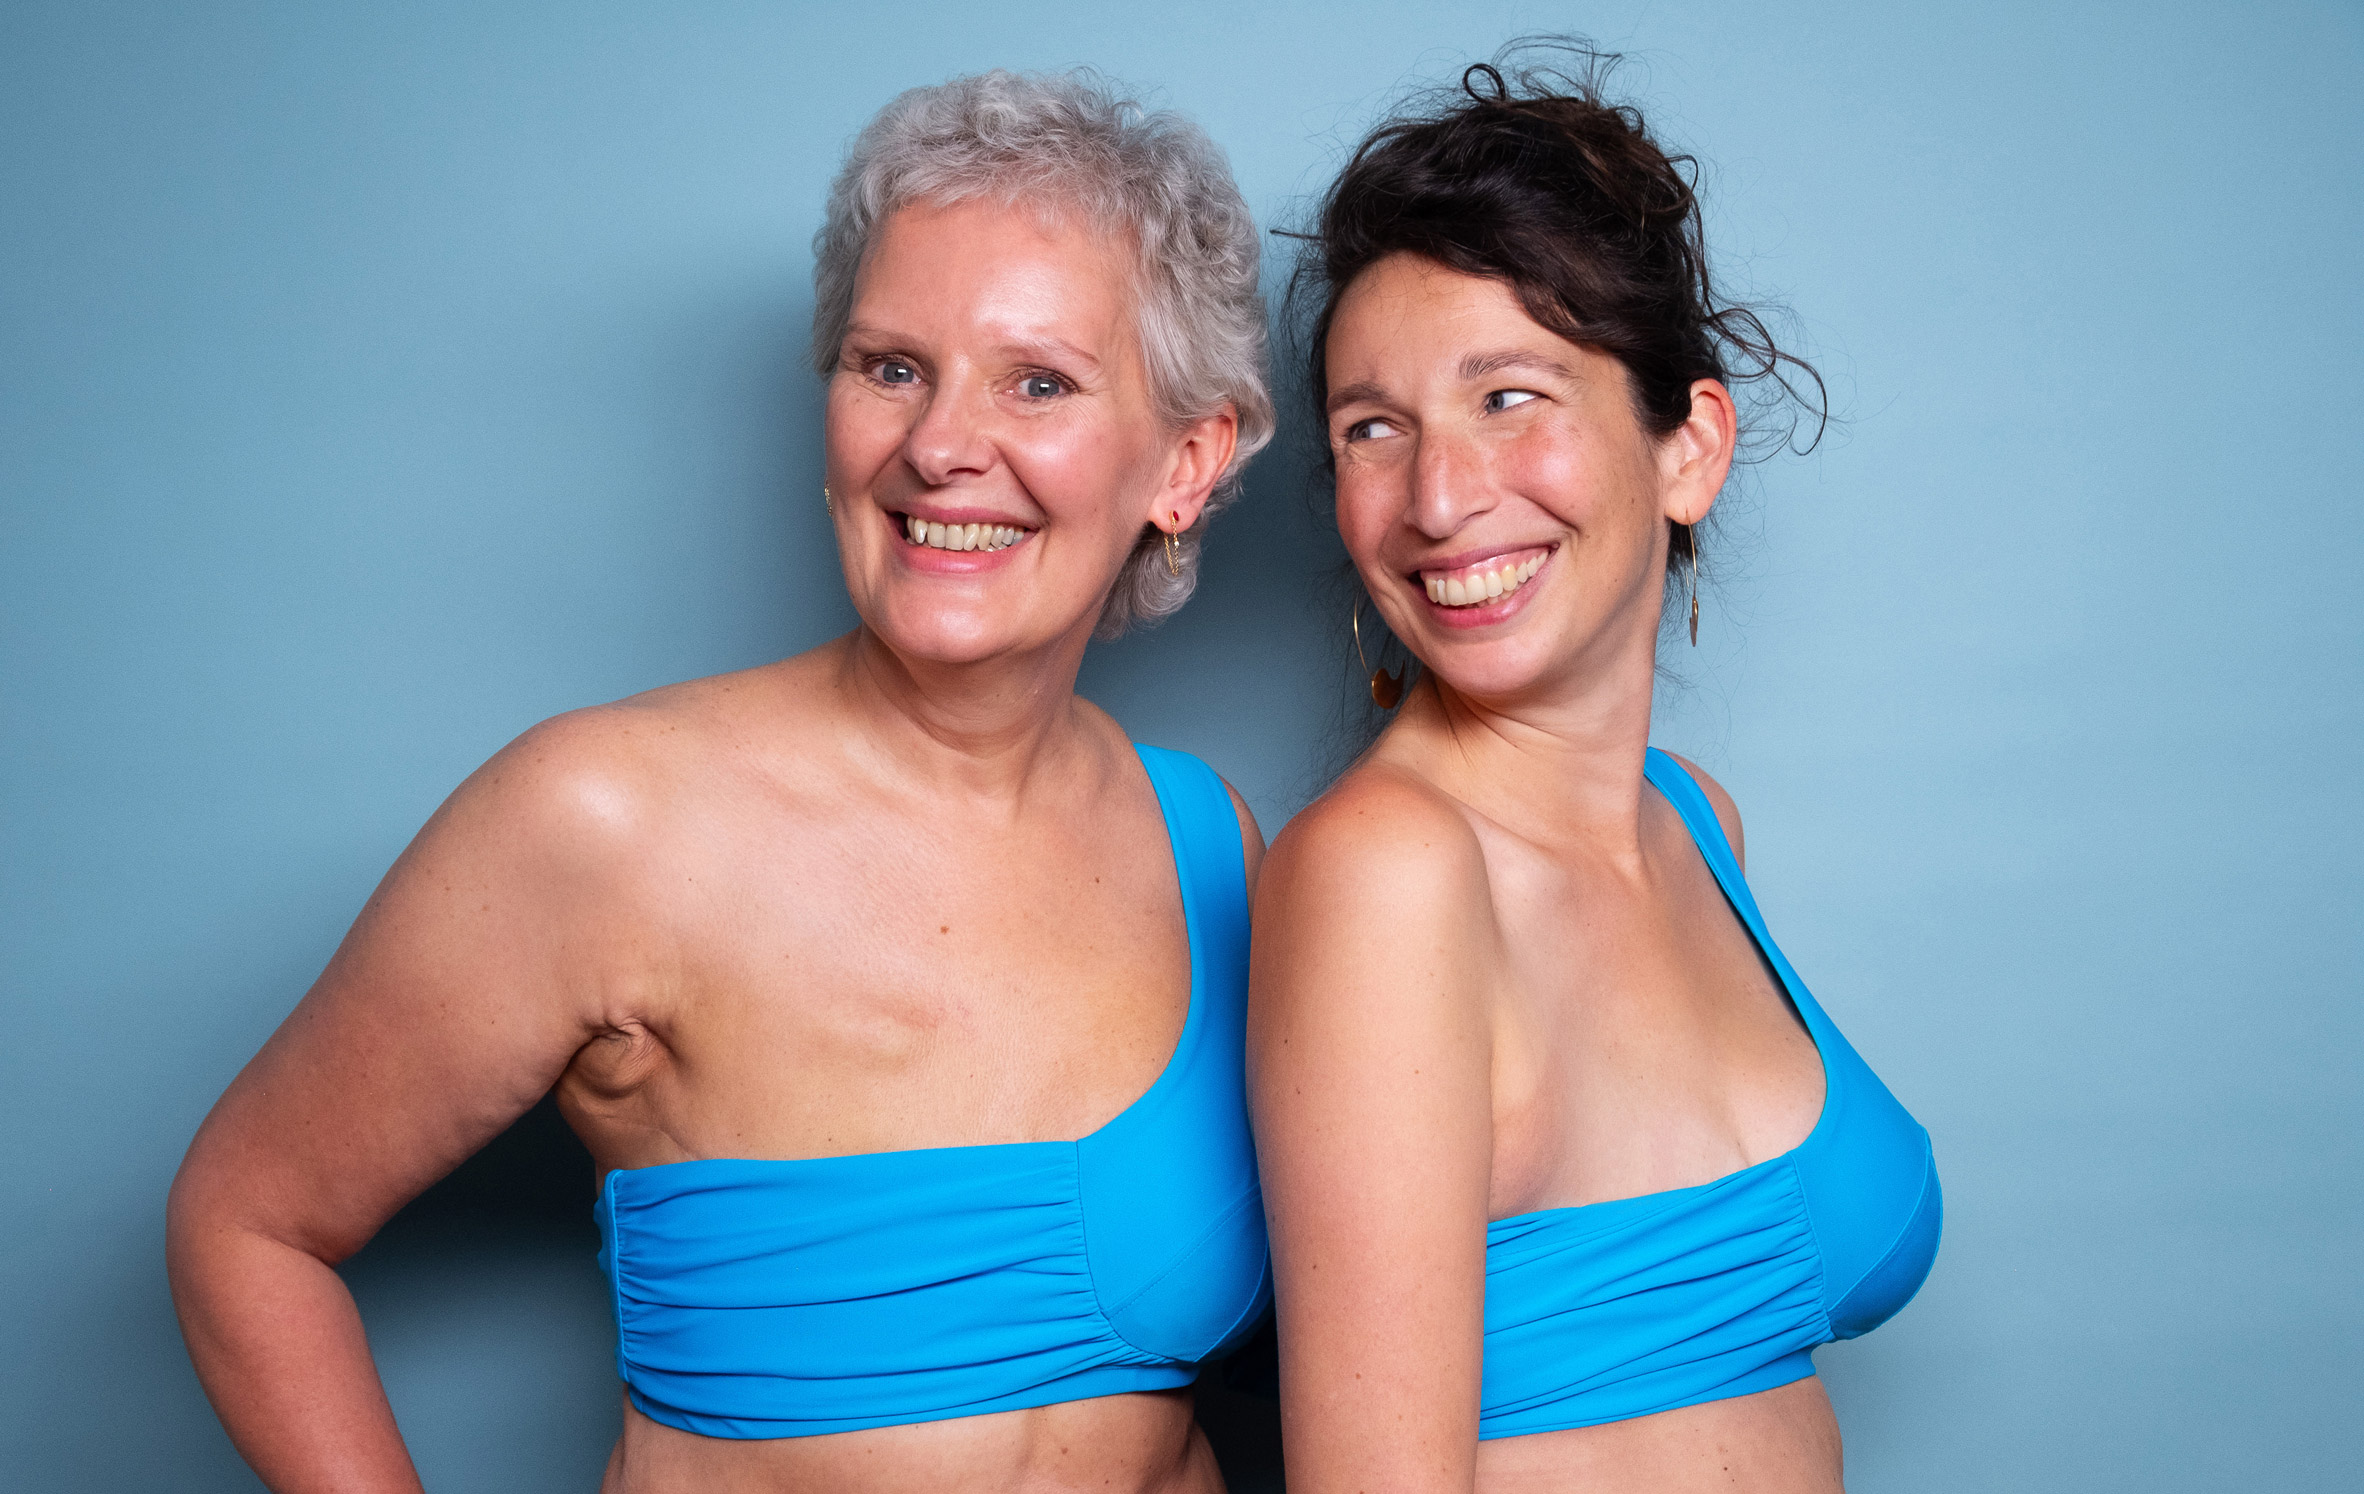 One-cup Uno bra designed for women to feel confidently asymmetric